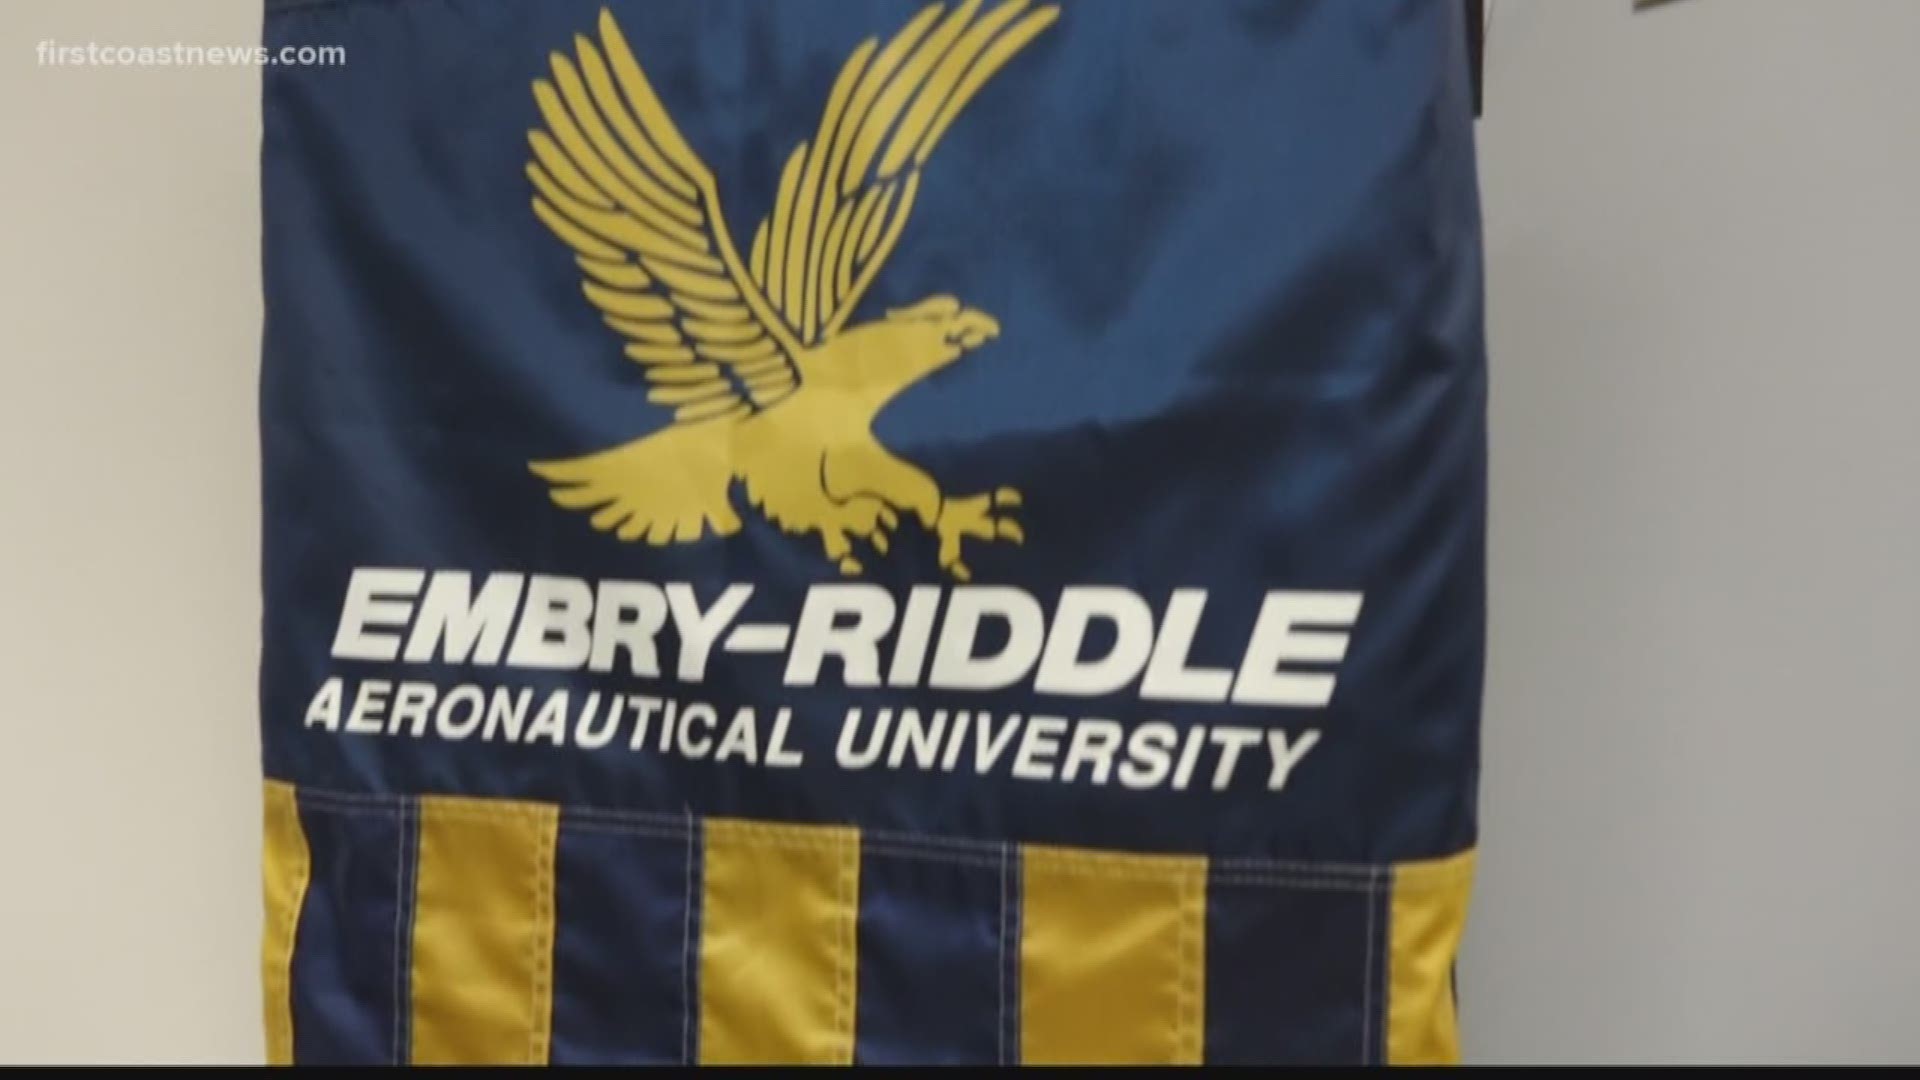 The Microsoft Software & Systems Academy partnered with Embry-Riddle to help train veterans in high demand IT skills.